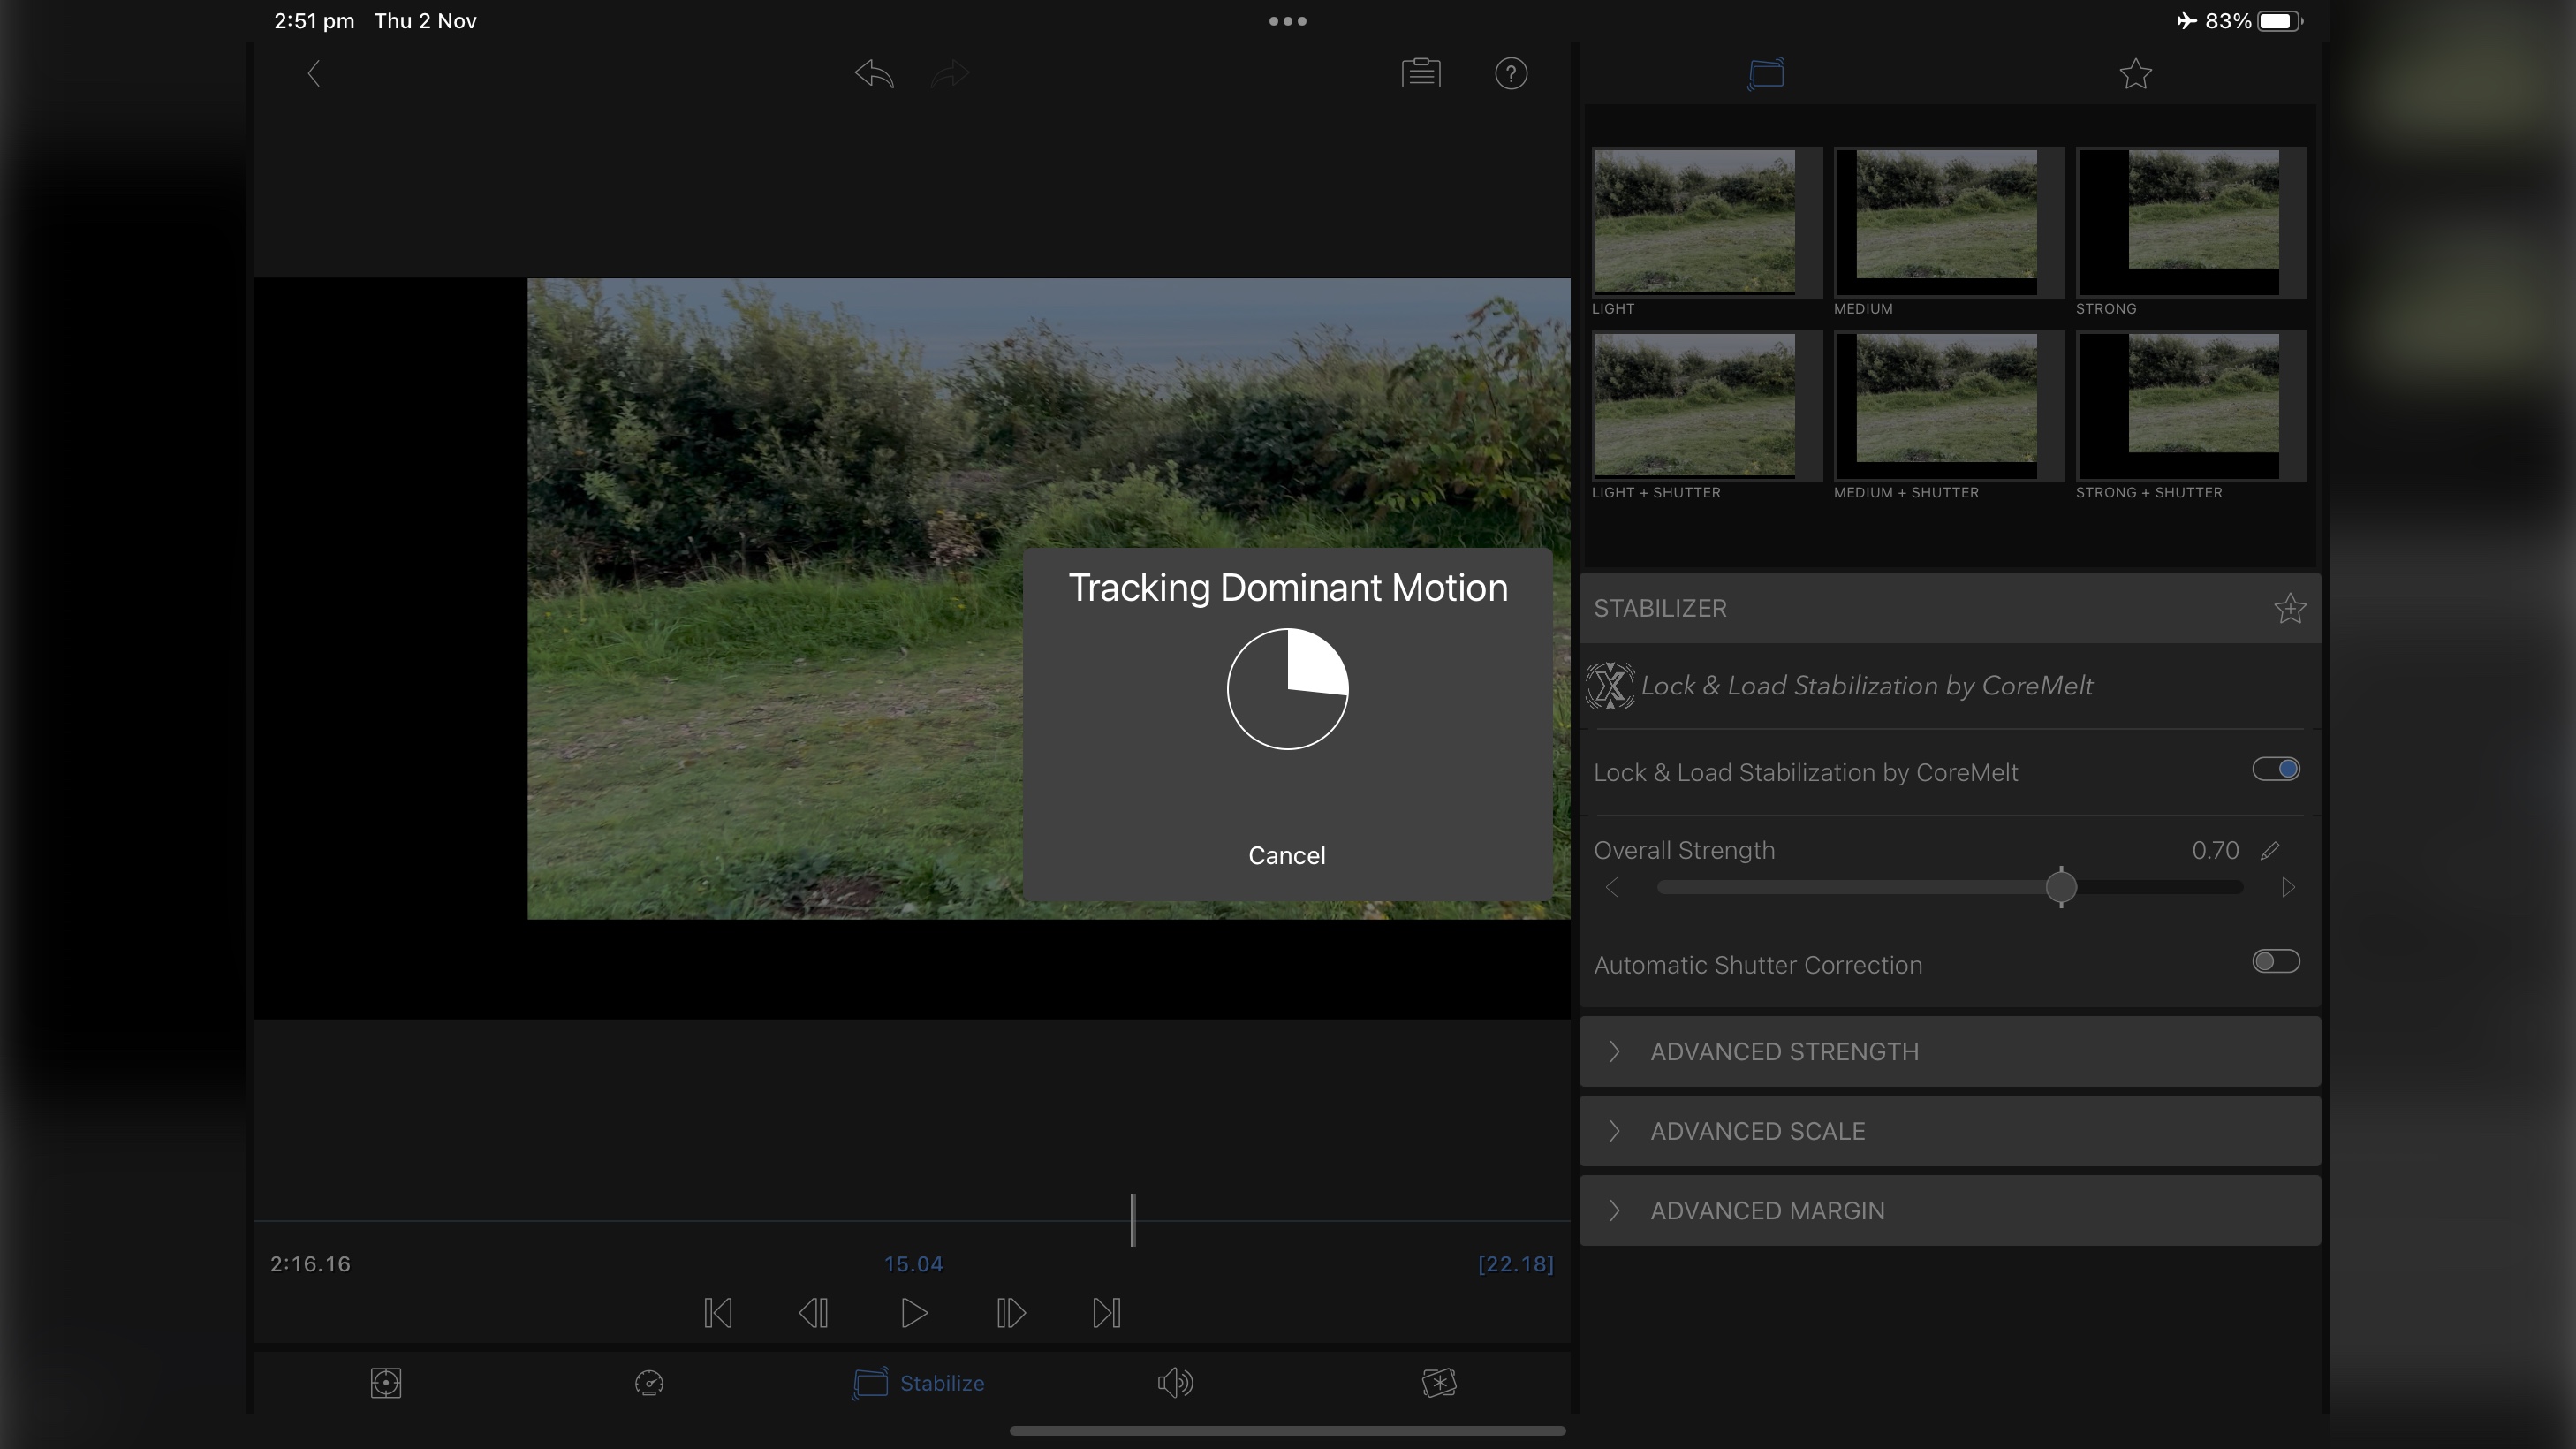 LumaTouch LumaFusion mobile video editing app during our testing